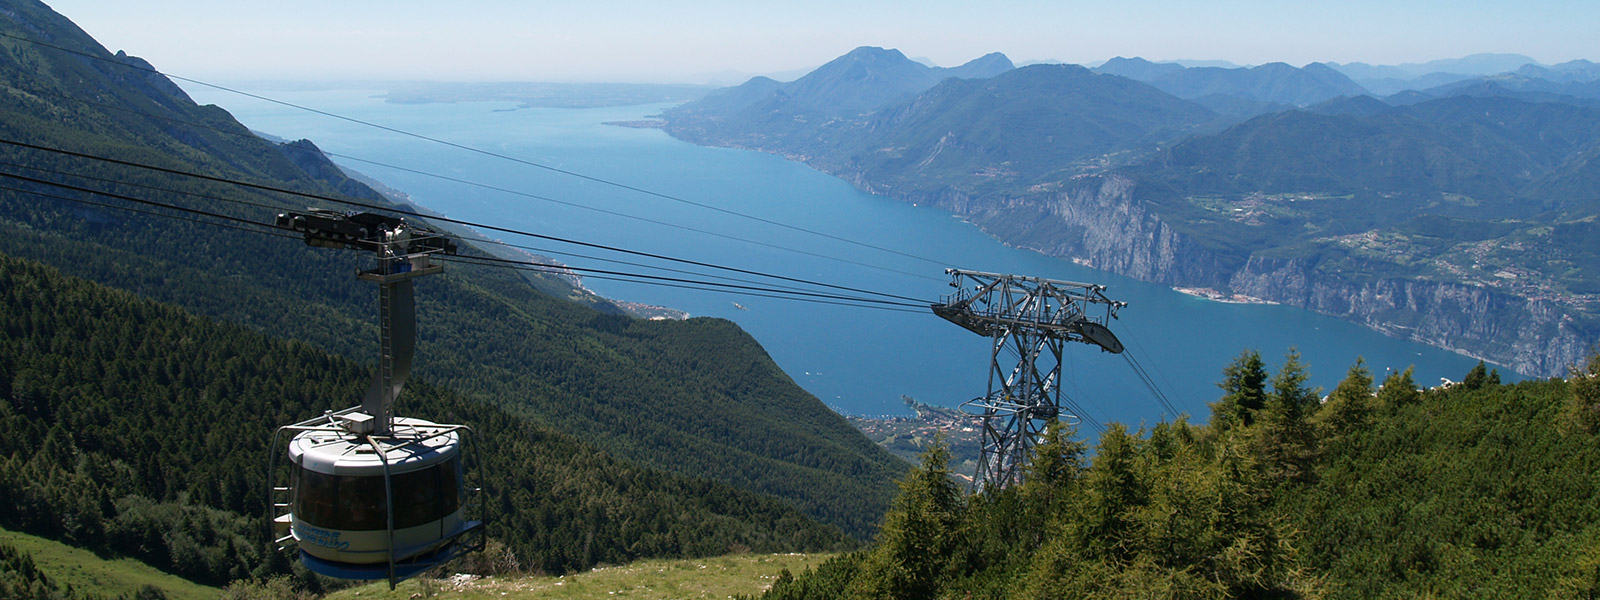 The cable car Funivia Malcesine – Monte Baldo, source Panoramio - Author:  Hans Hagenaars -  cutted from the original